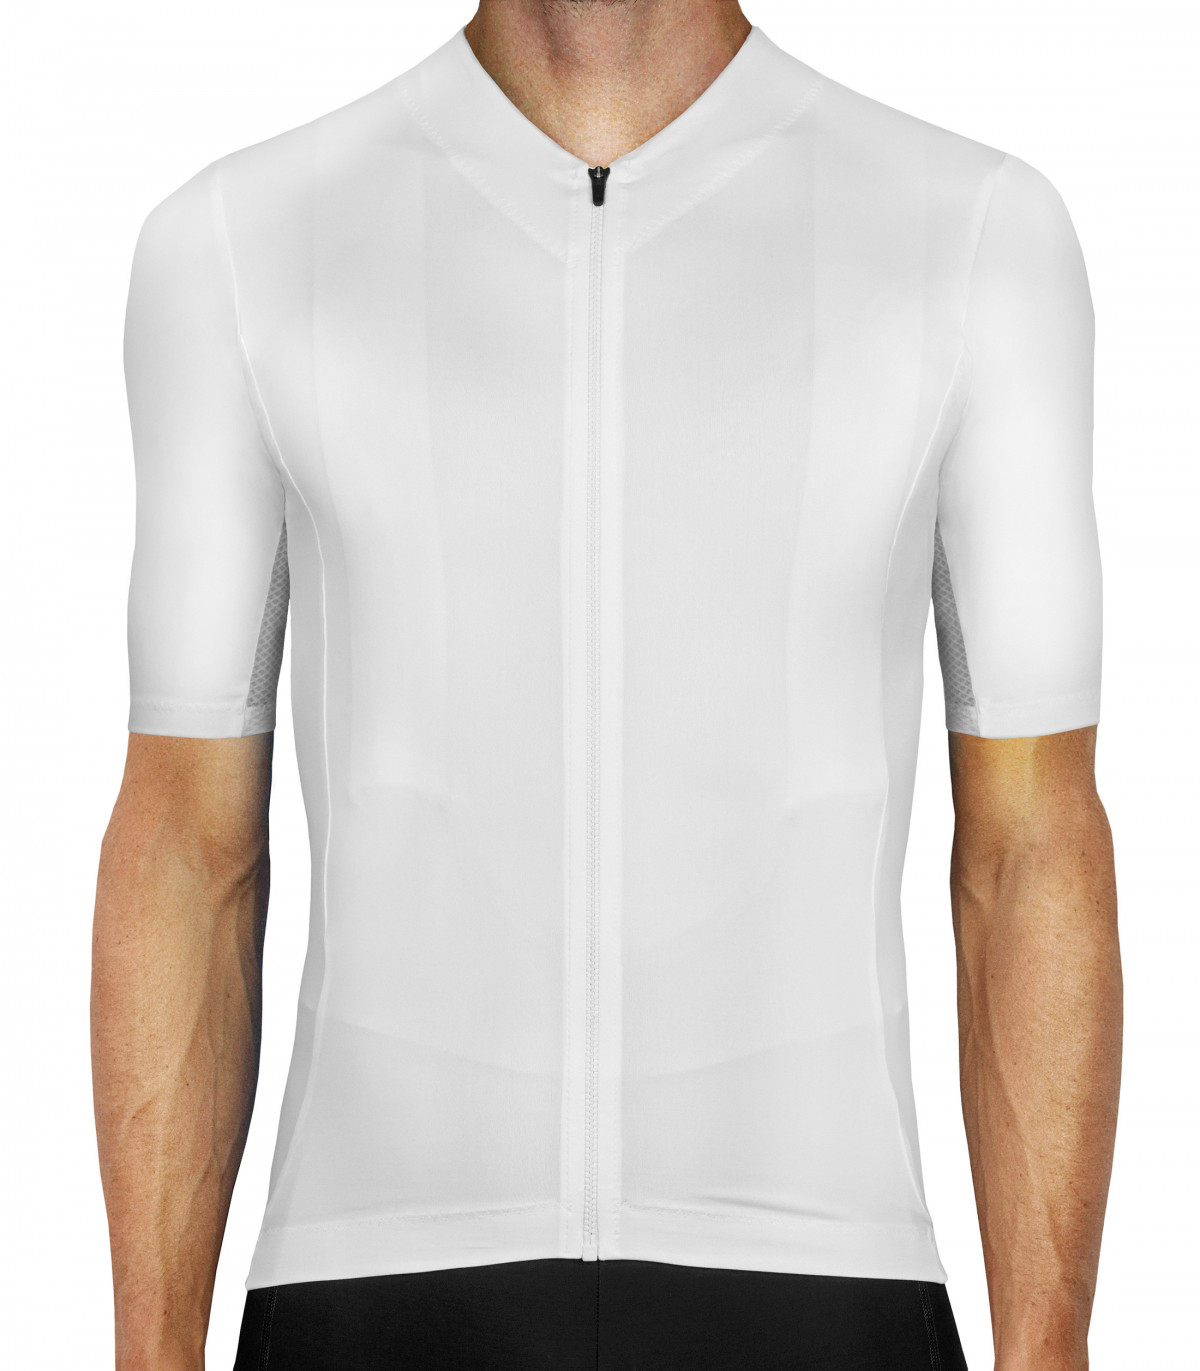 Download Secret White Cycling Jersey. No logo, Unbranded design | Luxa